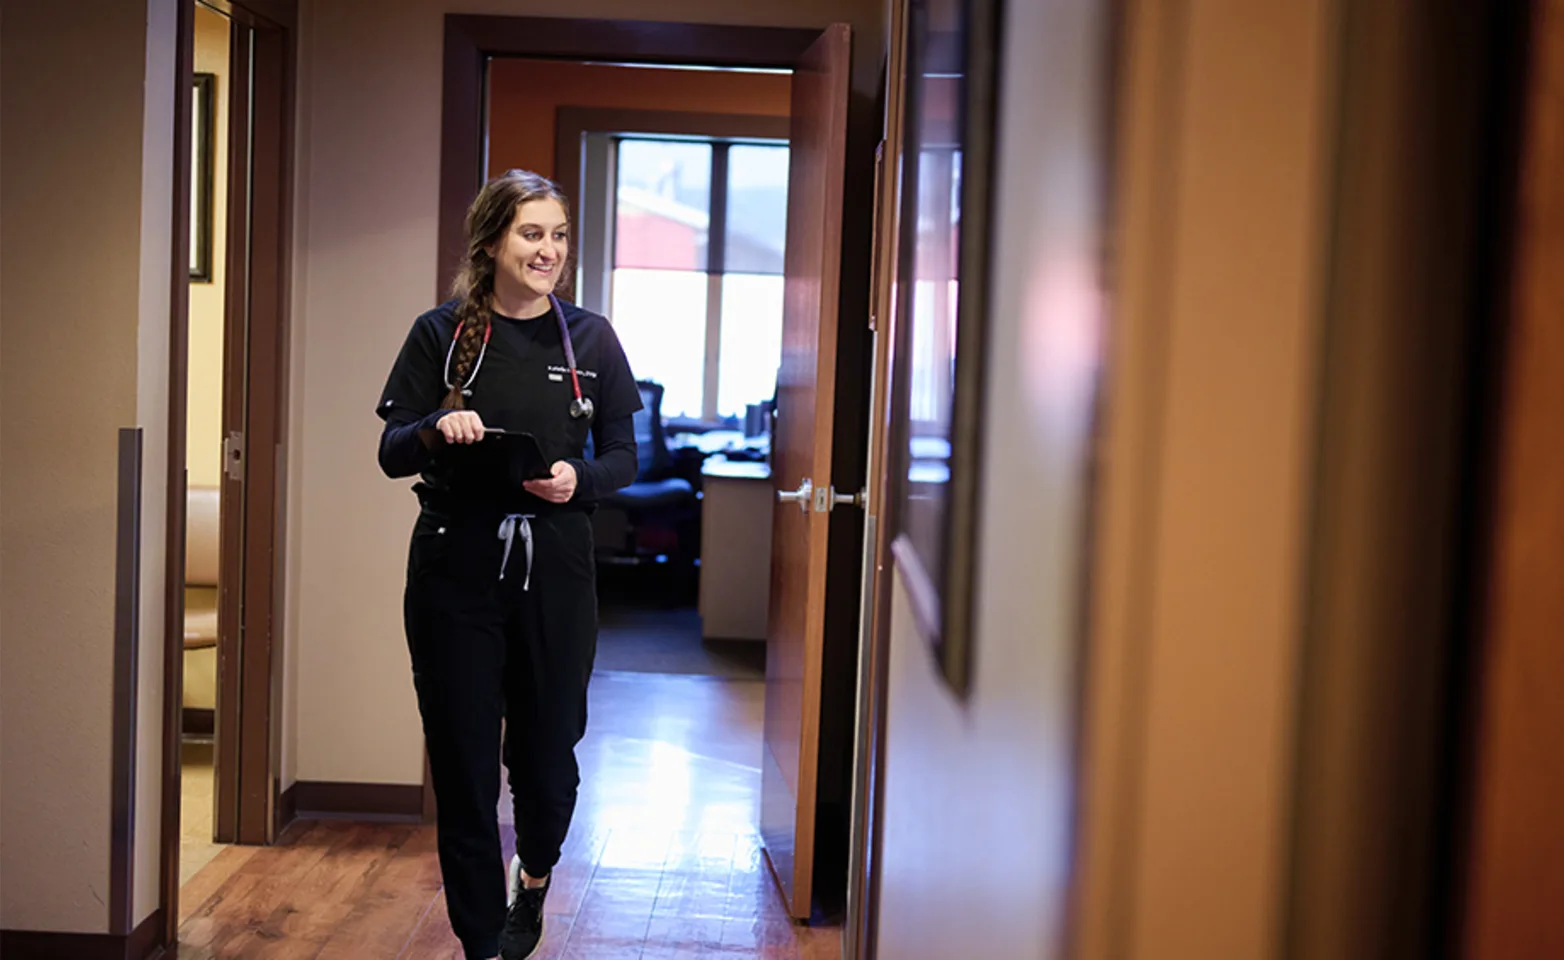 An employee walking through the hall with a smile